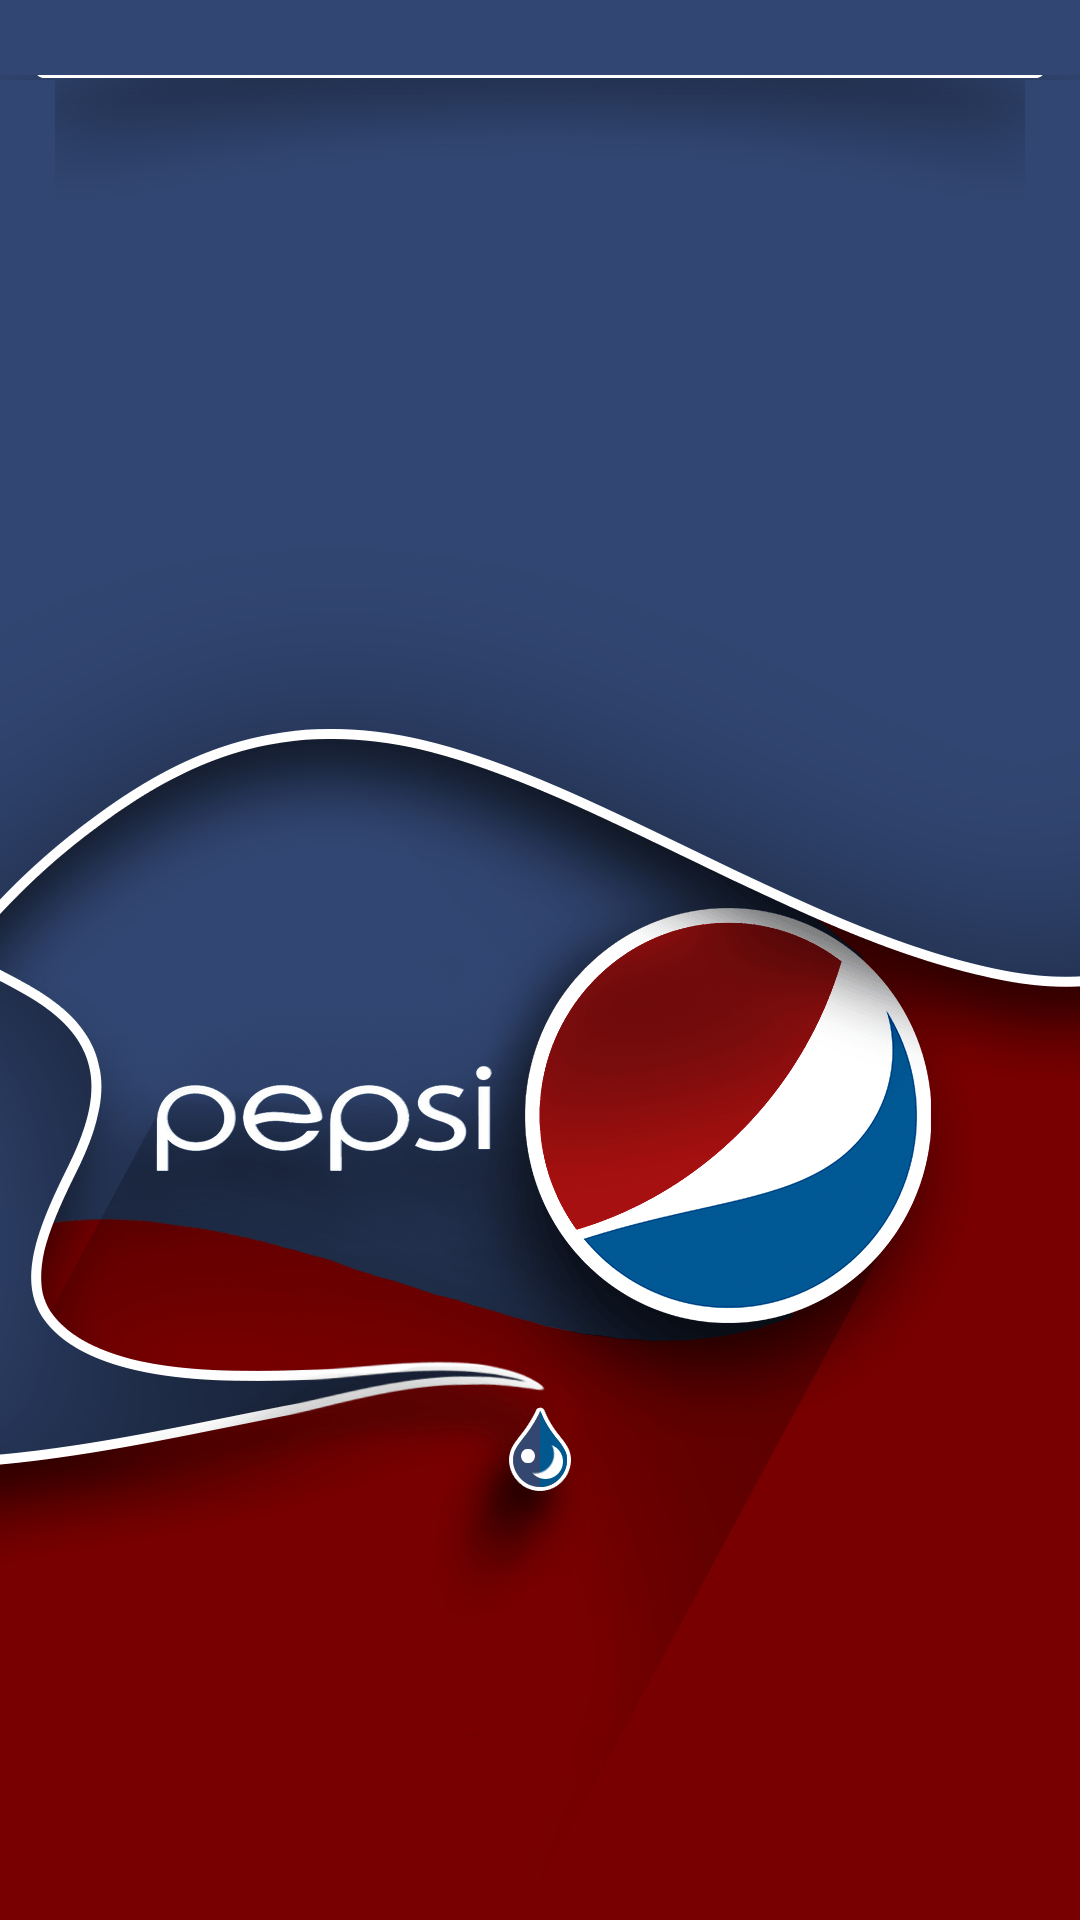 Pepsi Red White and Blue Wallpapers